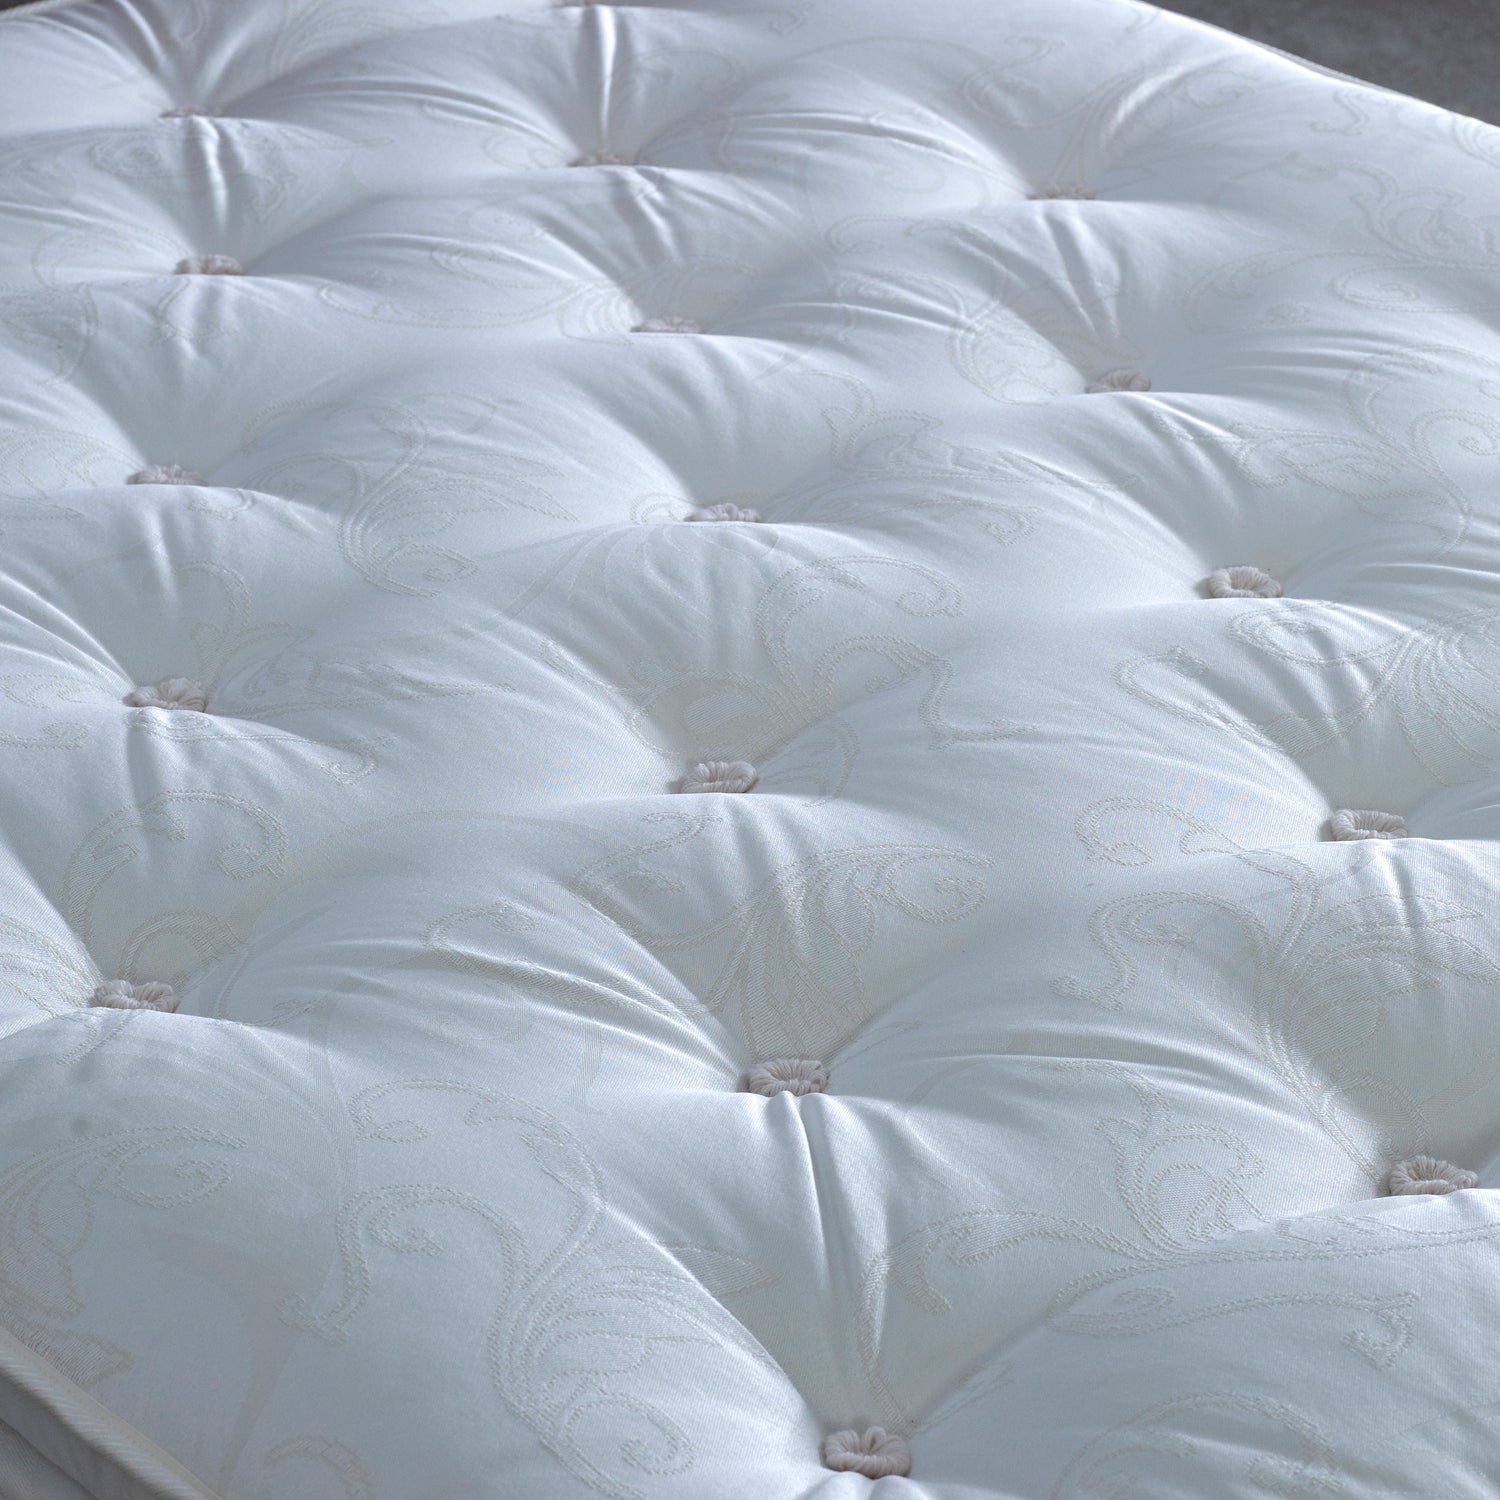 Bedmaster signature 2000 Pillow Top Mattress Tufts And Cover Close Up-Better Bed Company 